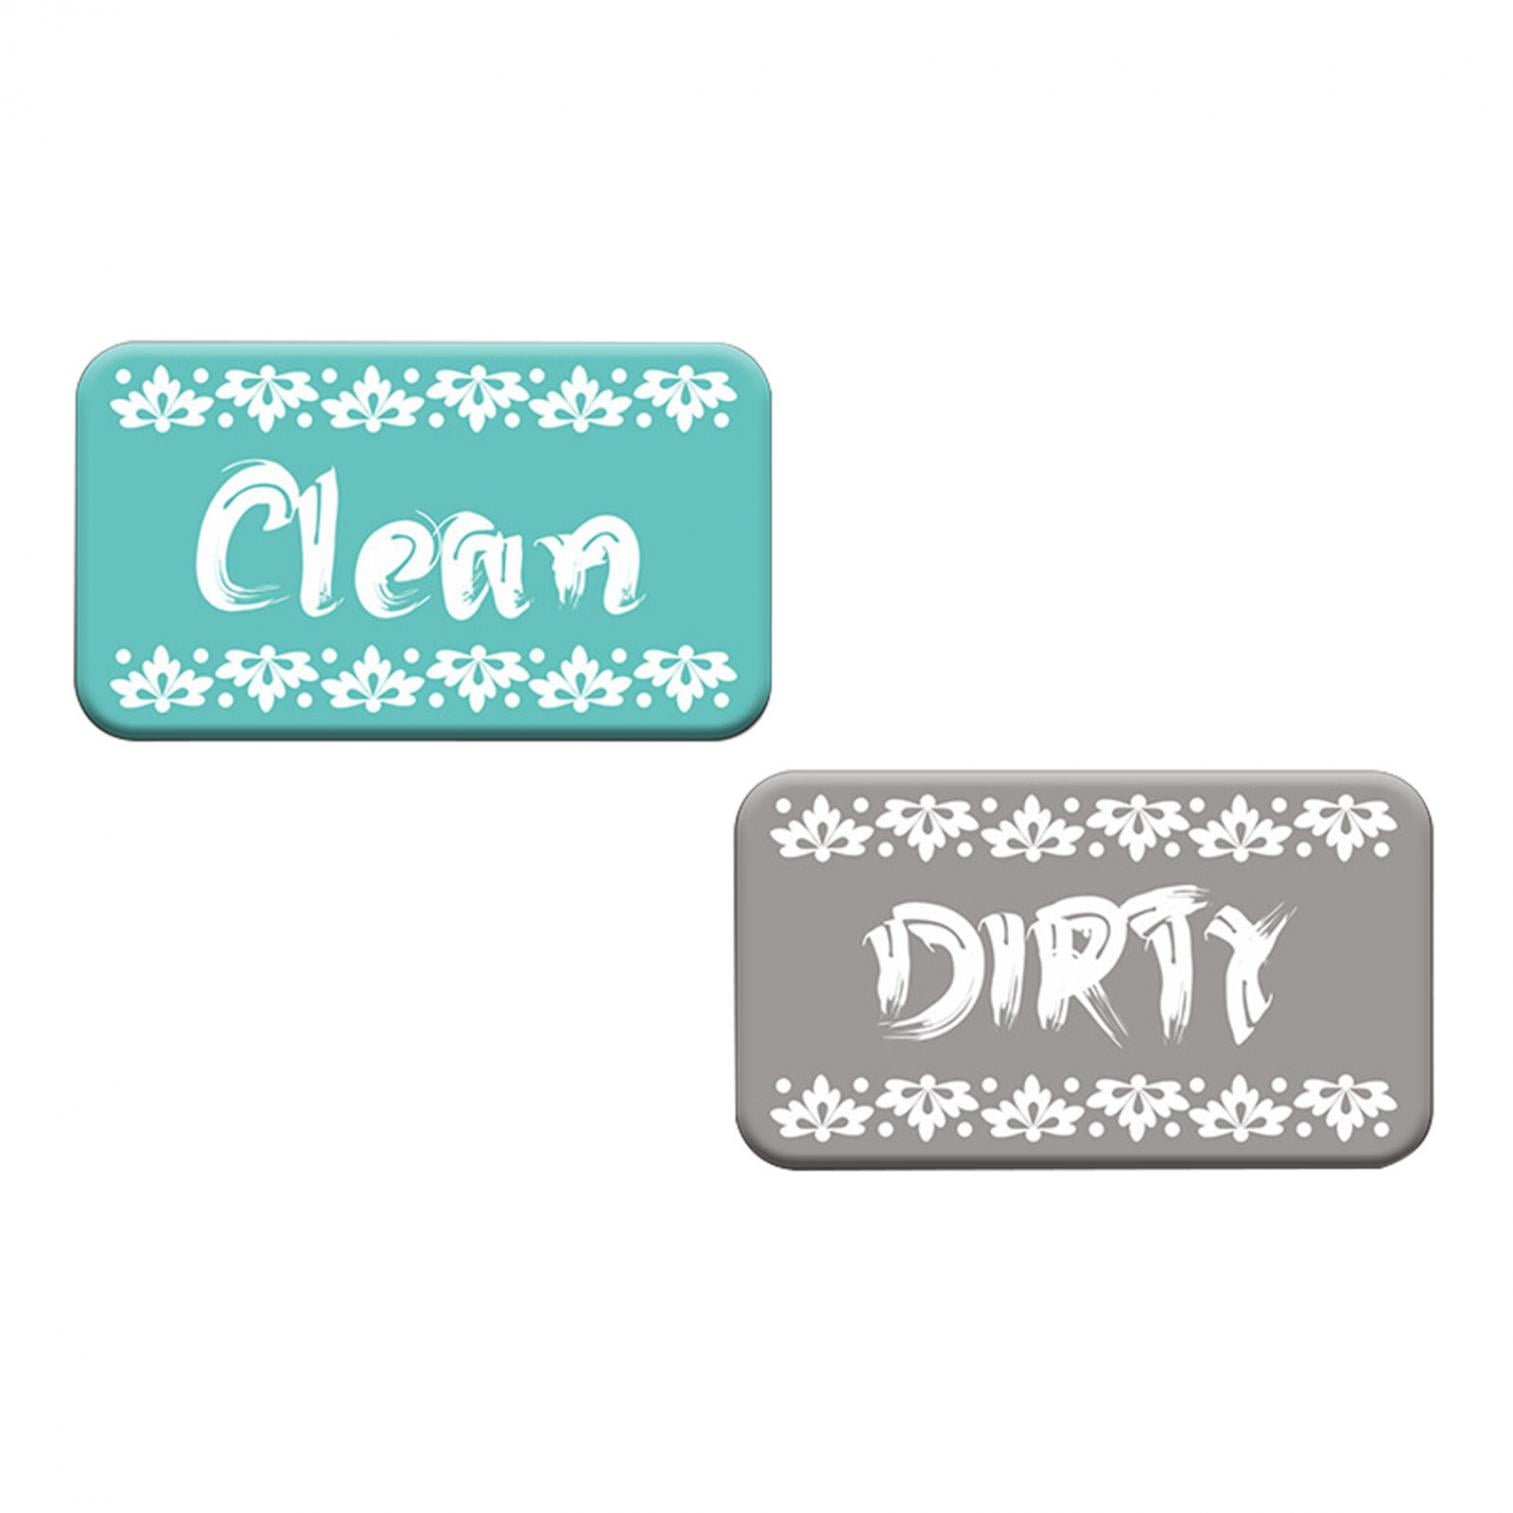 Qisiwole Dirty Clean Dishwasher Magnet,Dishwasher Magnet Clean Dirty Sign for Dishwasher Dish Bin That Says Clean or Dirty Dish Washer Refrigerator